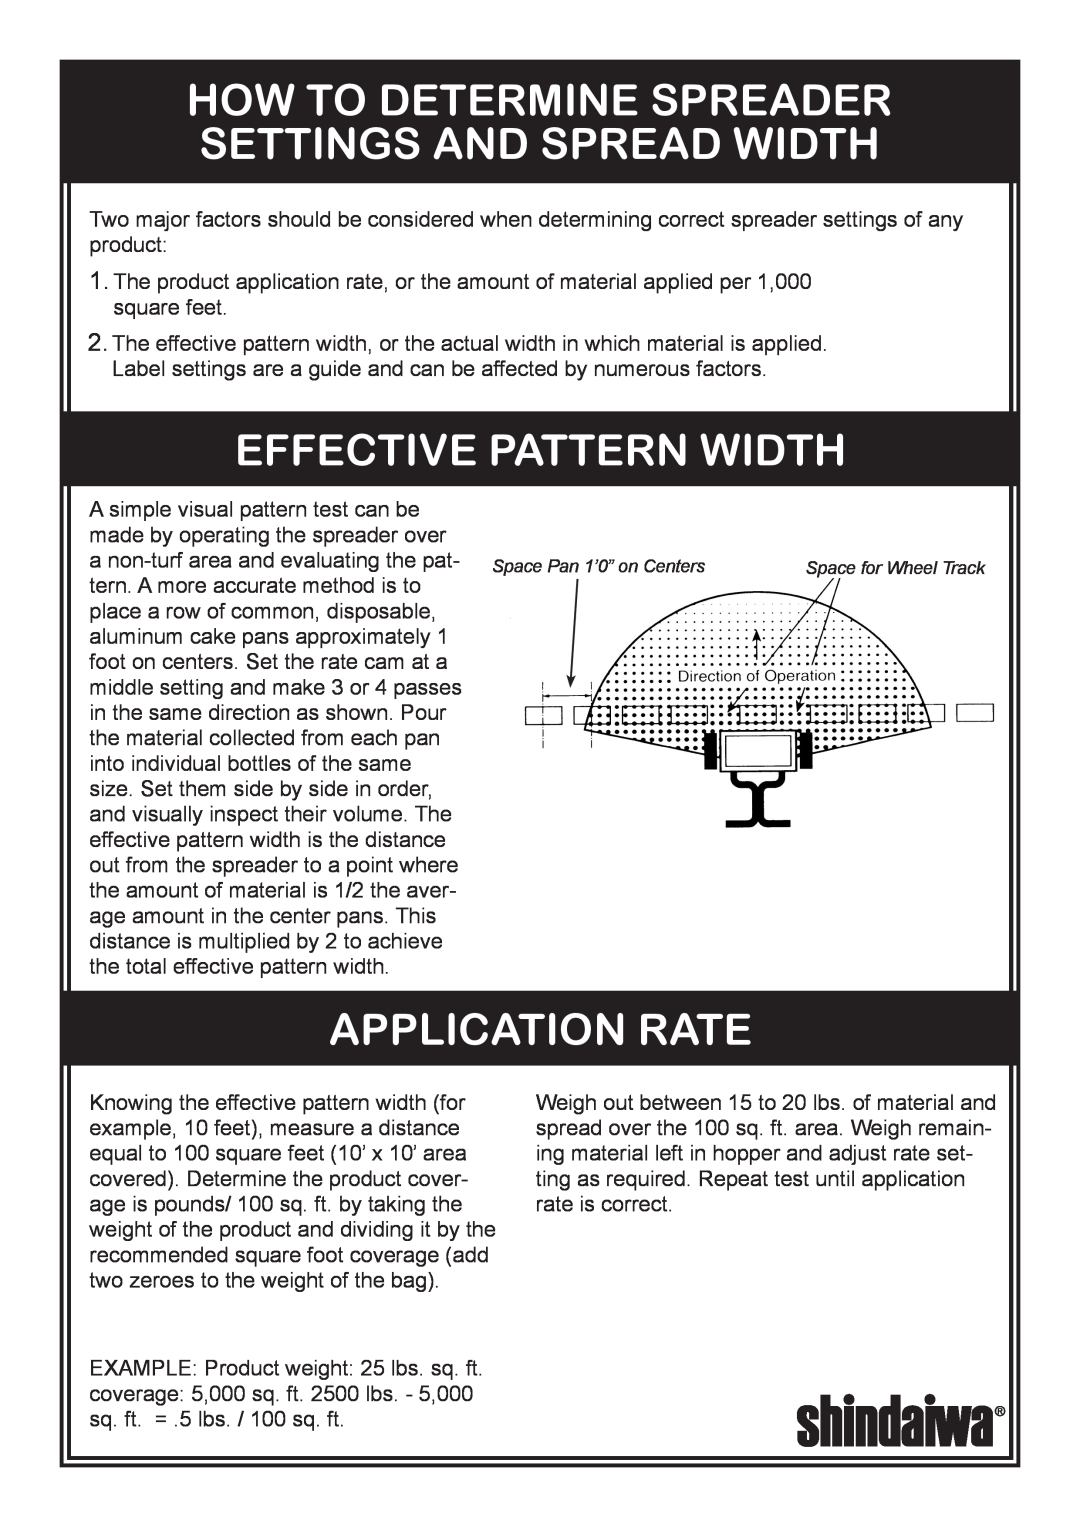 Shindaiwa 76RS owner manual How To Determine Spreader Settings And Spread Width, Effective Pattern Width, Application Rate 